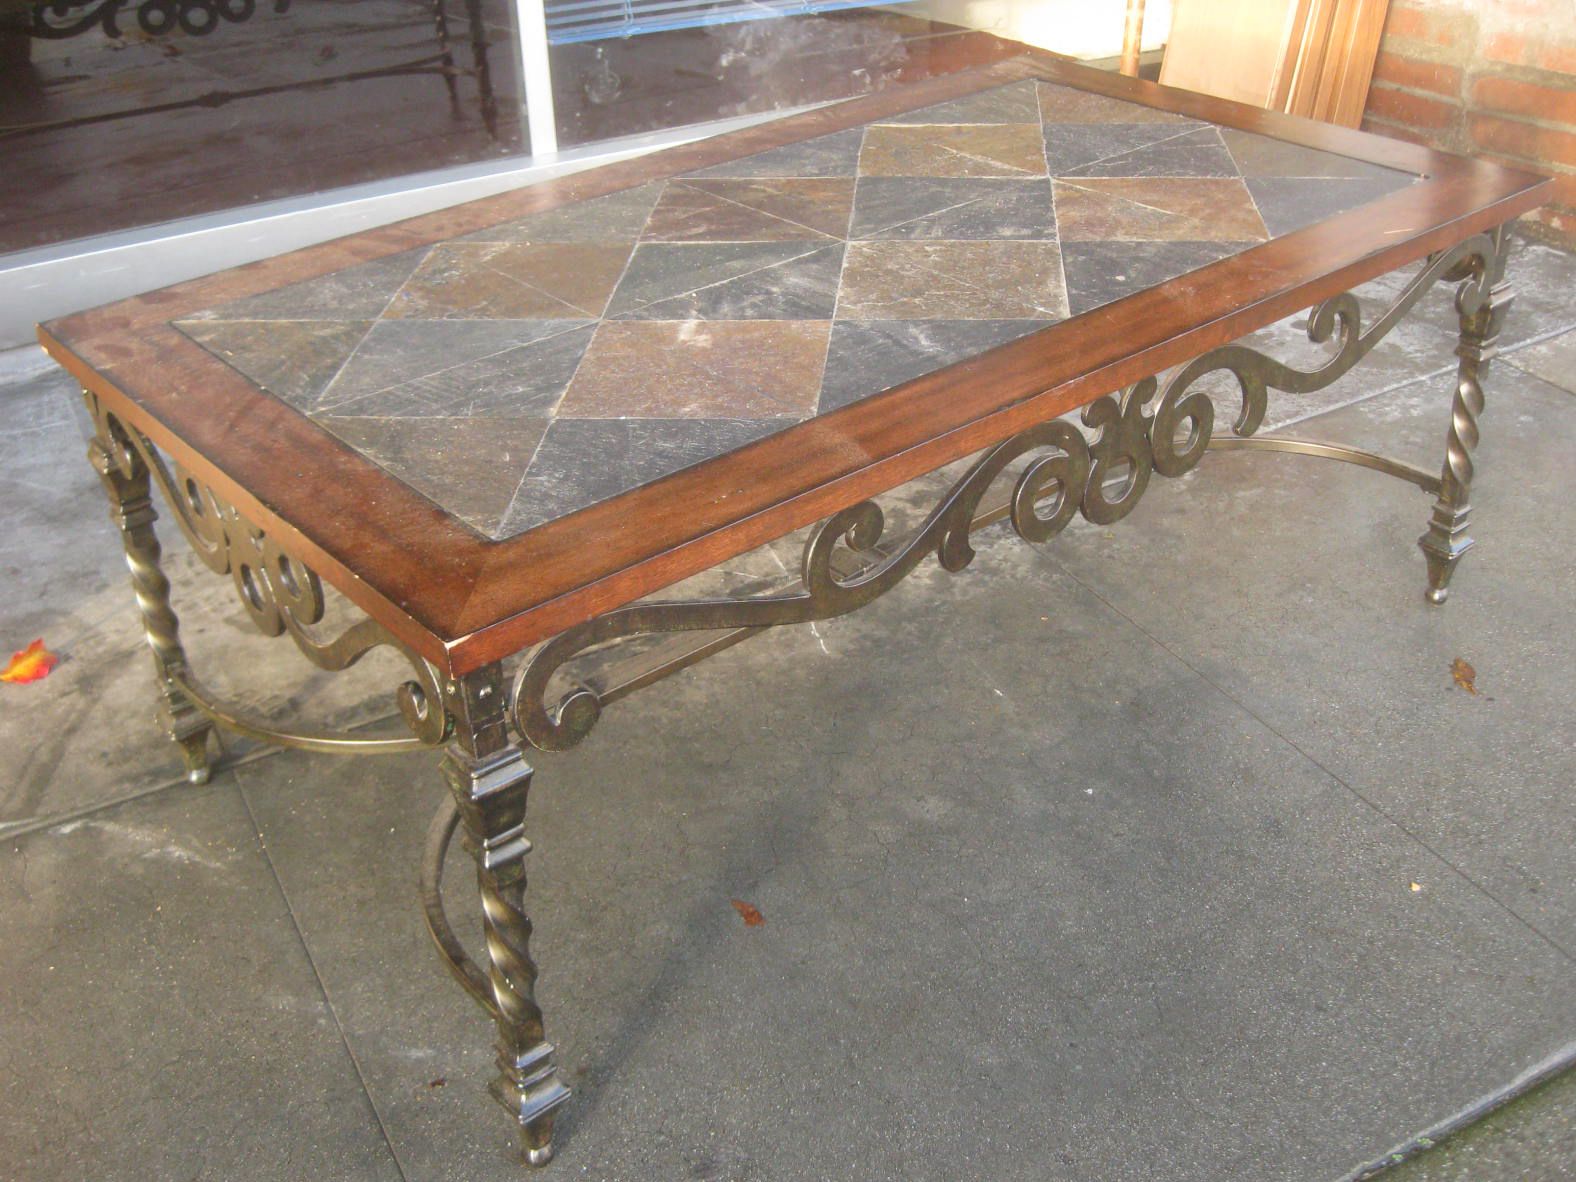 Aged Black Iron Coffee Tables Intended For Widely Used Uhuru Furniture & Collectibles: Sold – Tile Top Coffee (View 2 of 20)